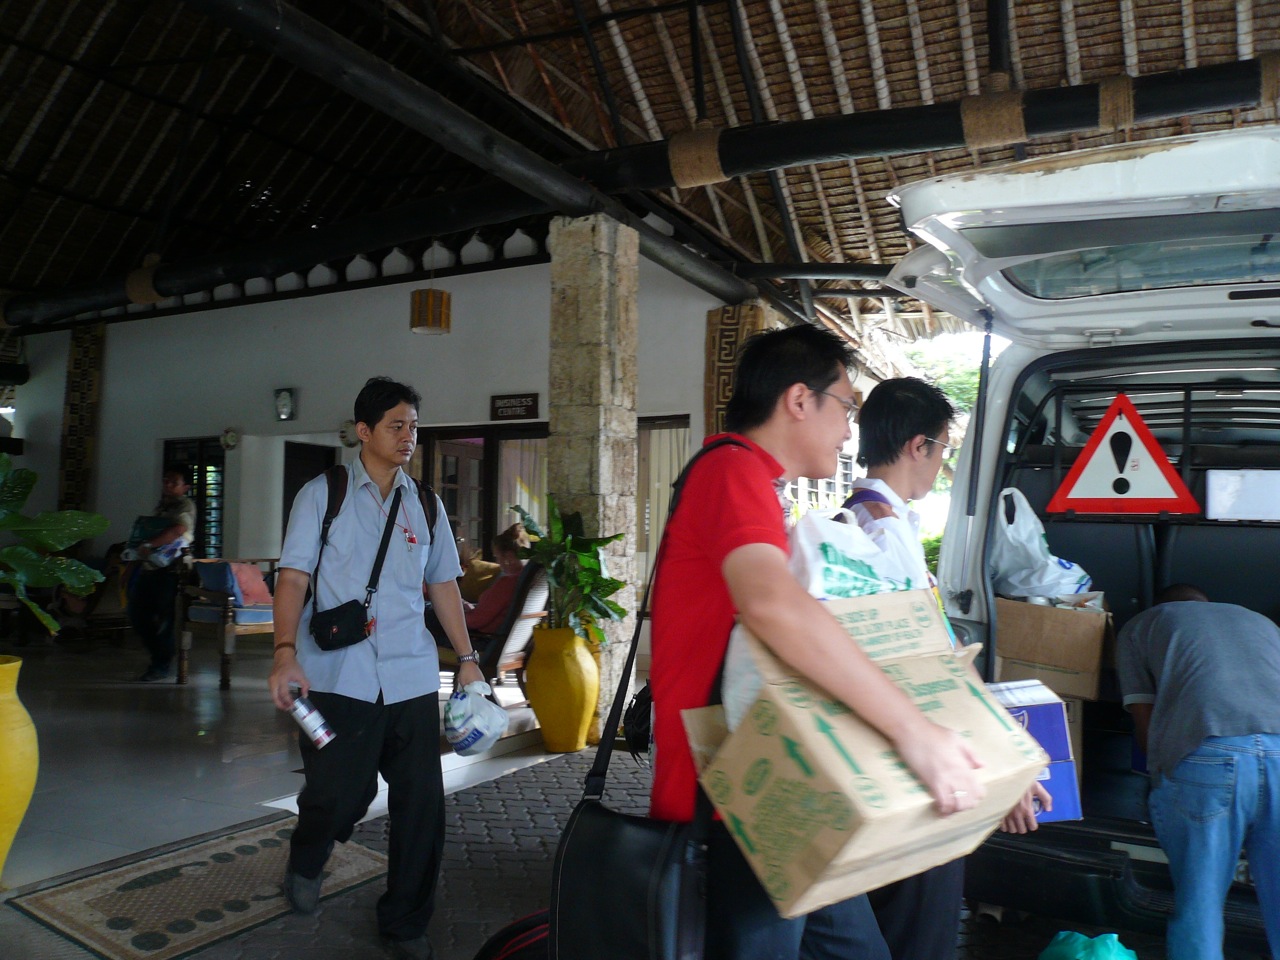 Team loading supplies for another Medical Camp in Kenya